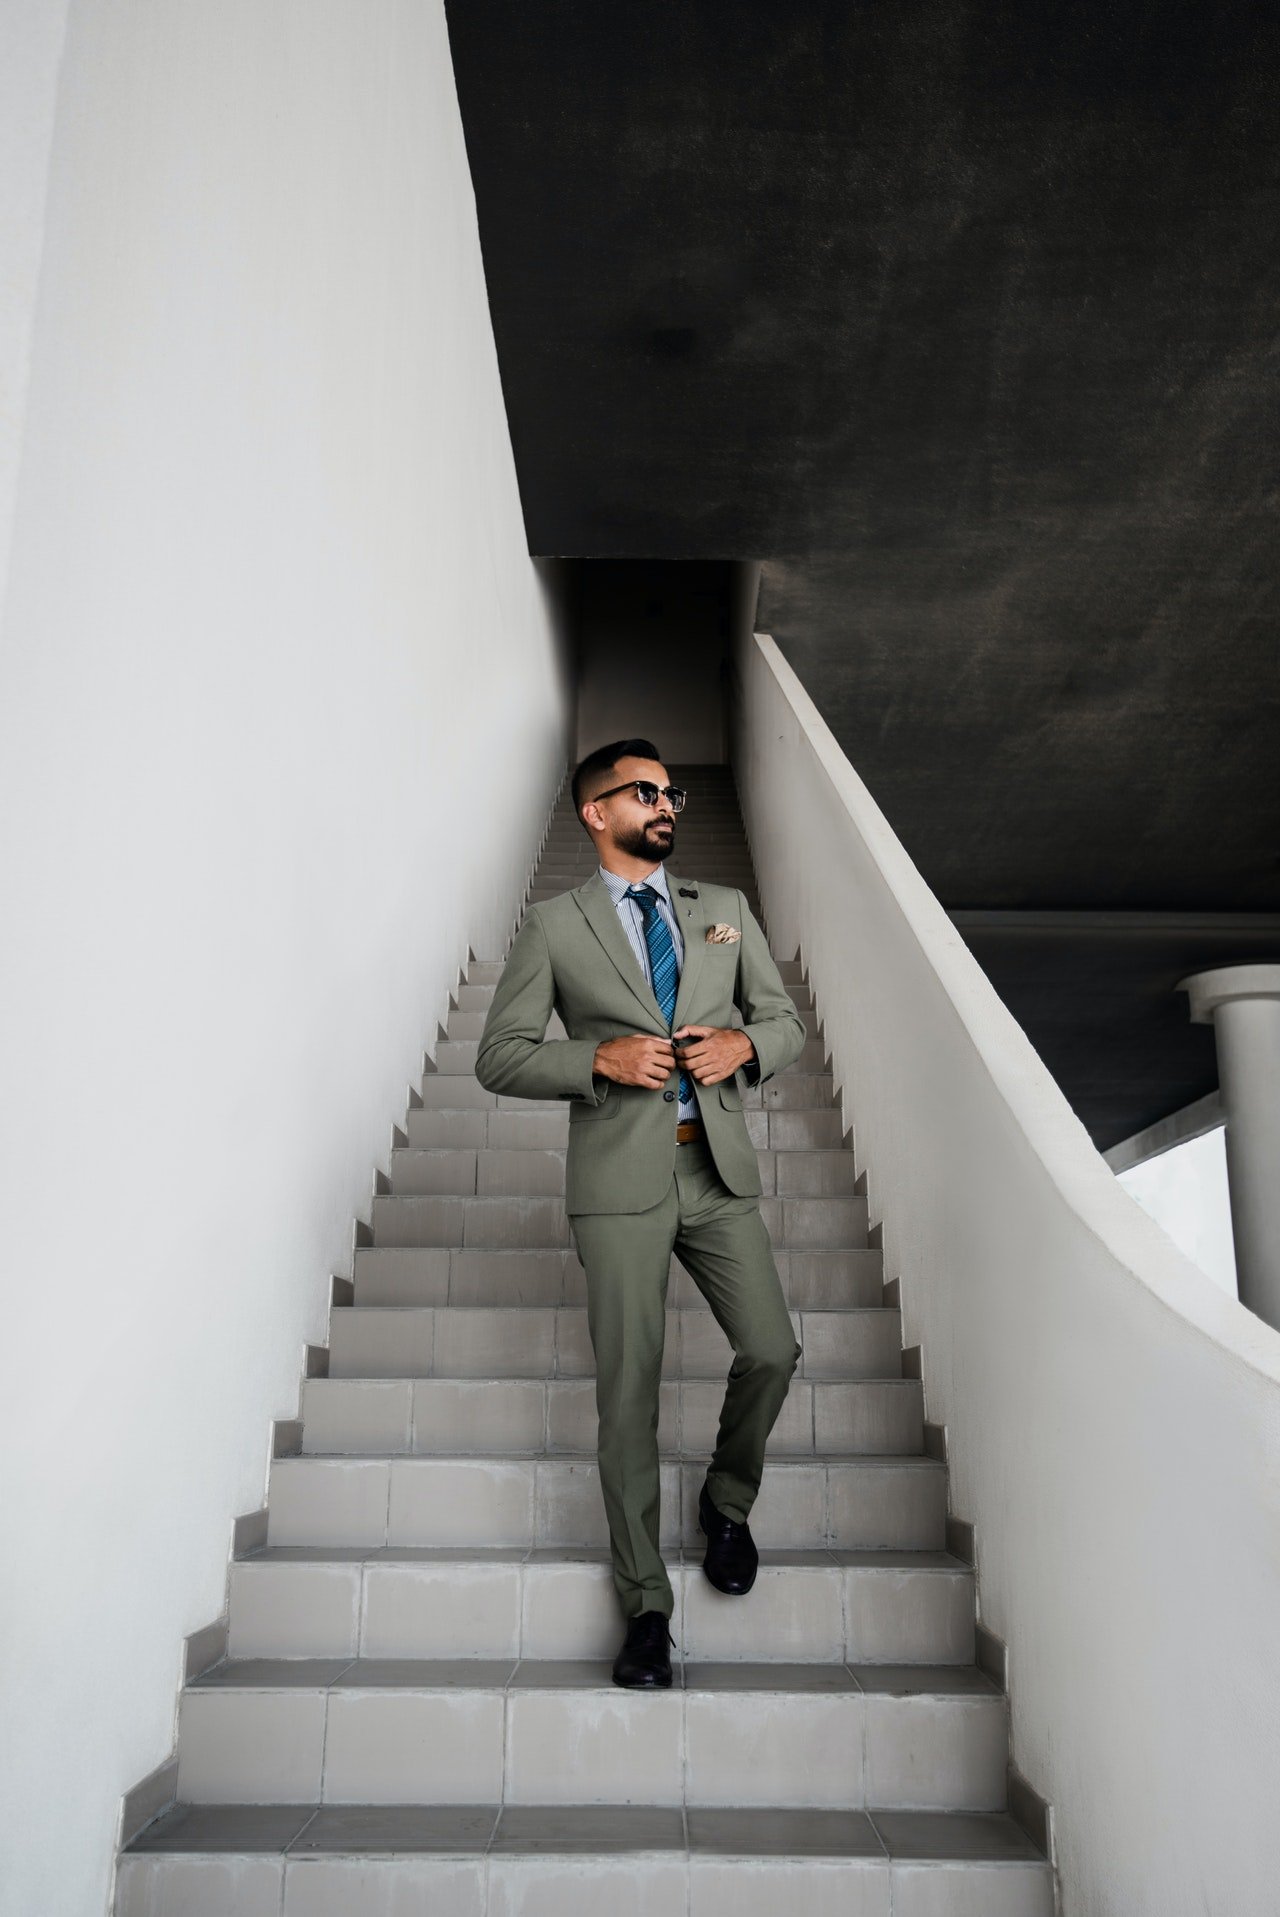 A man in grey suit standing on a staircase | Photo: Pexels